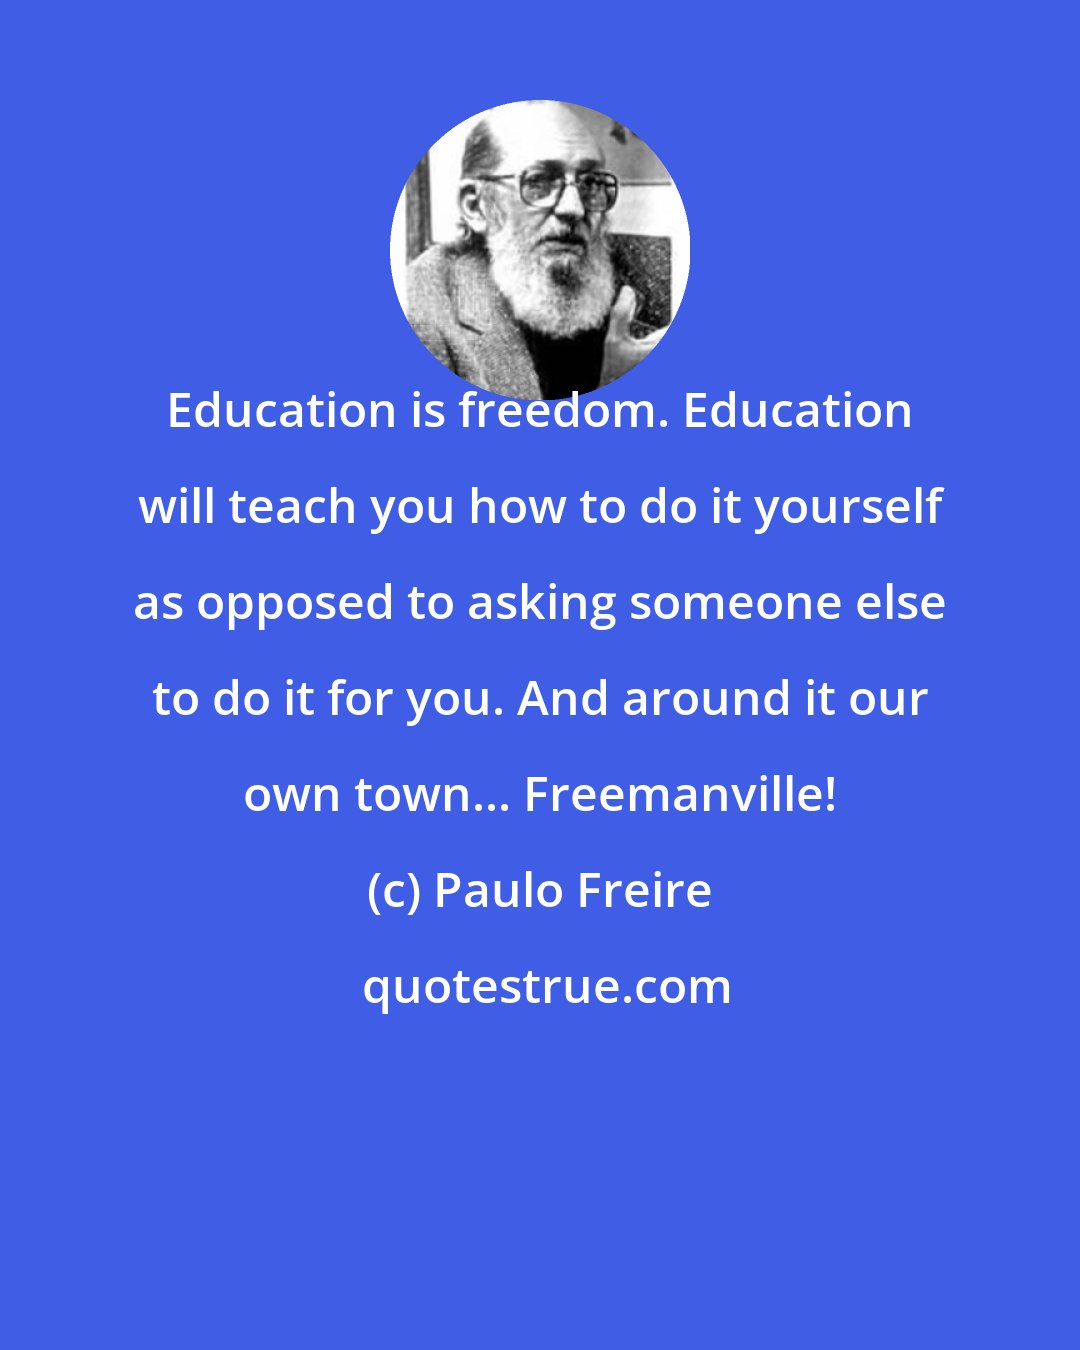 Paulo Freire: Education is freedom. Education will teach you how to do it yourself as opposed to asking someone else to do it for you. And around it our own town... Freemanville!